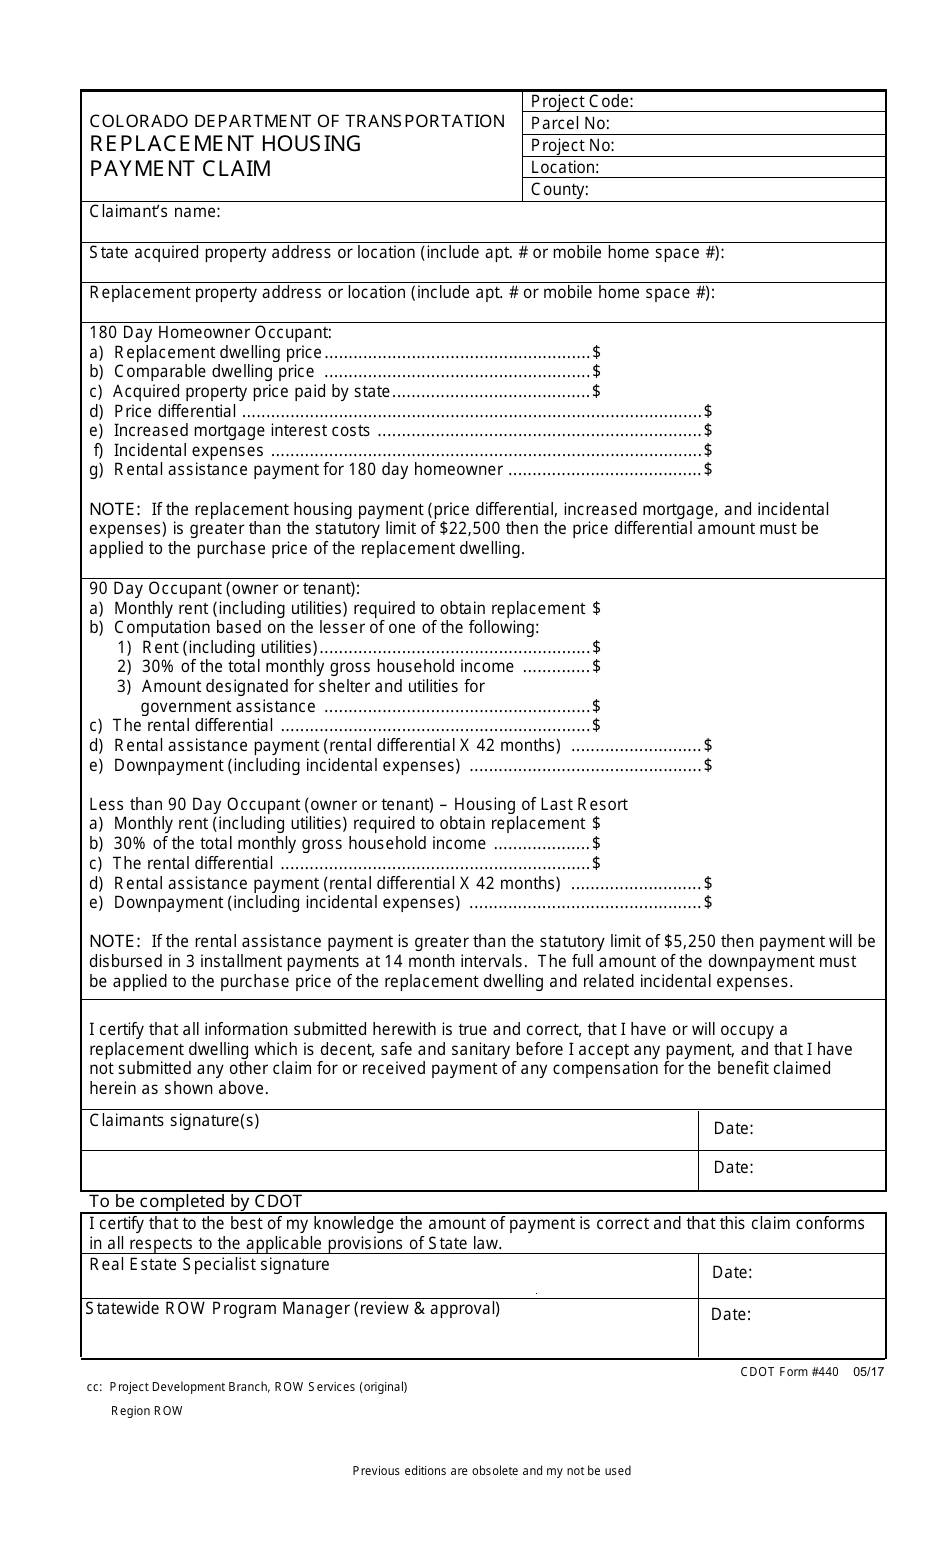 CDOT Form 440 Replacement Housing Payment Claim - Colorado, Page 1